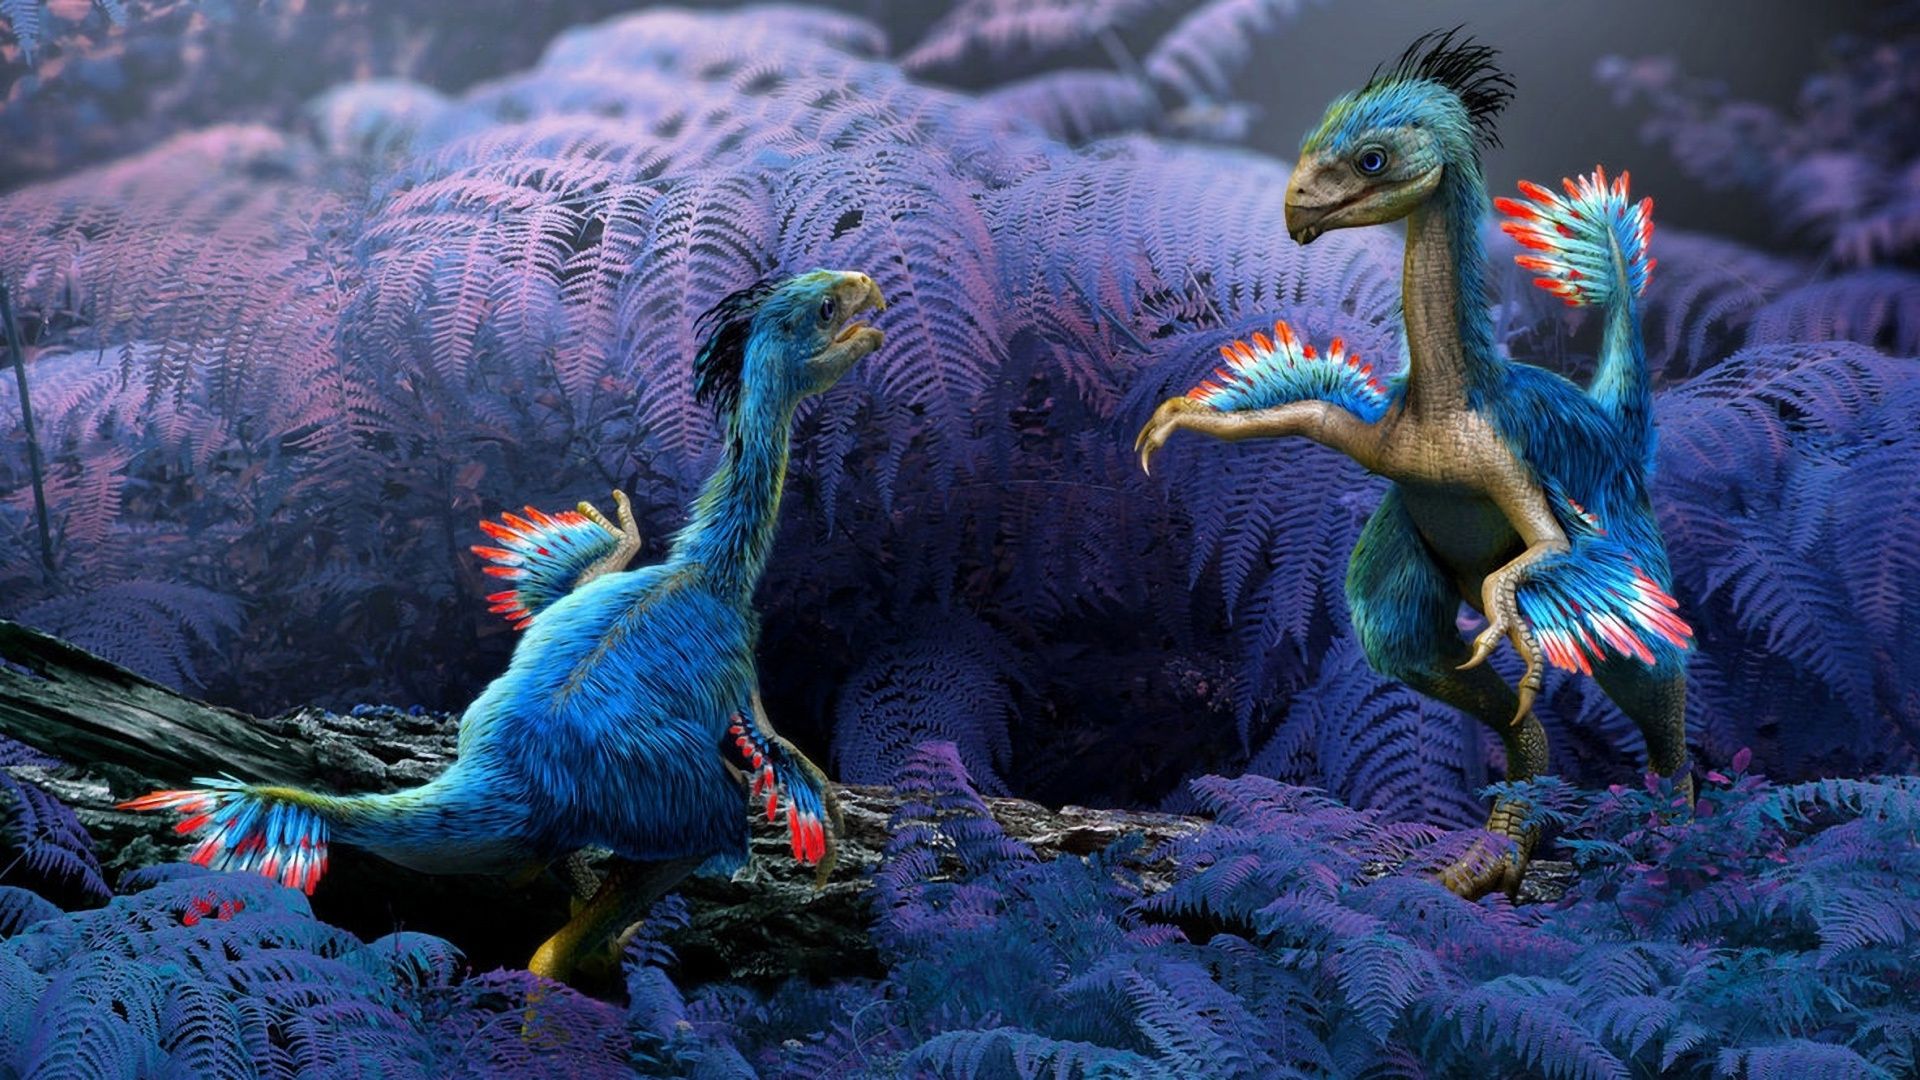 Wallpaper Ancient animals, dinosaurs 1920x1080 Full HD 2K Picture, Image